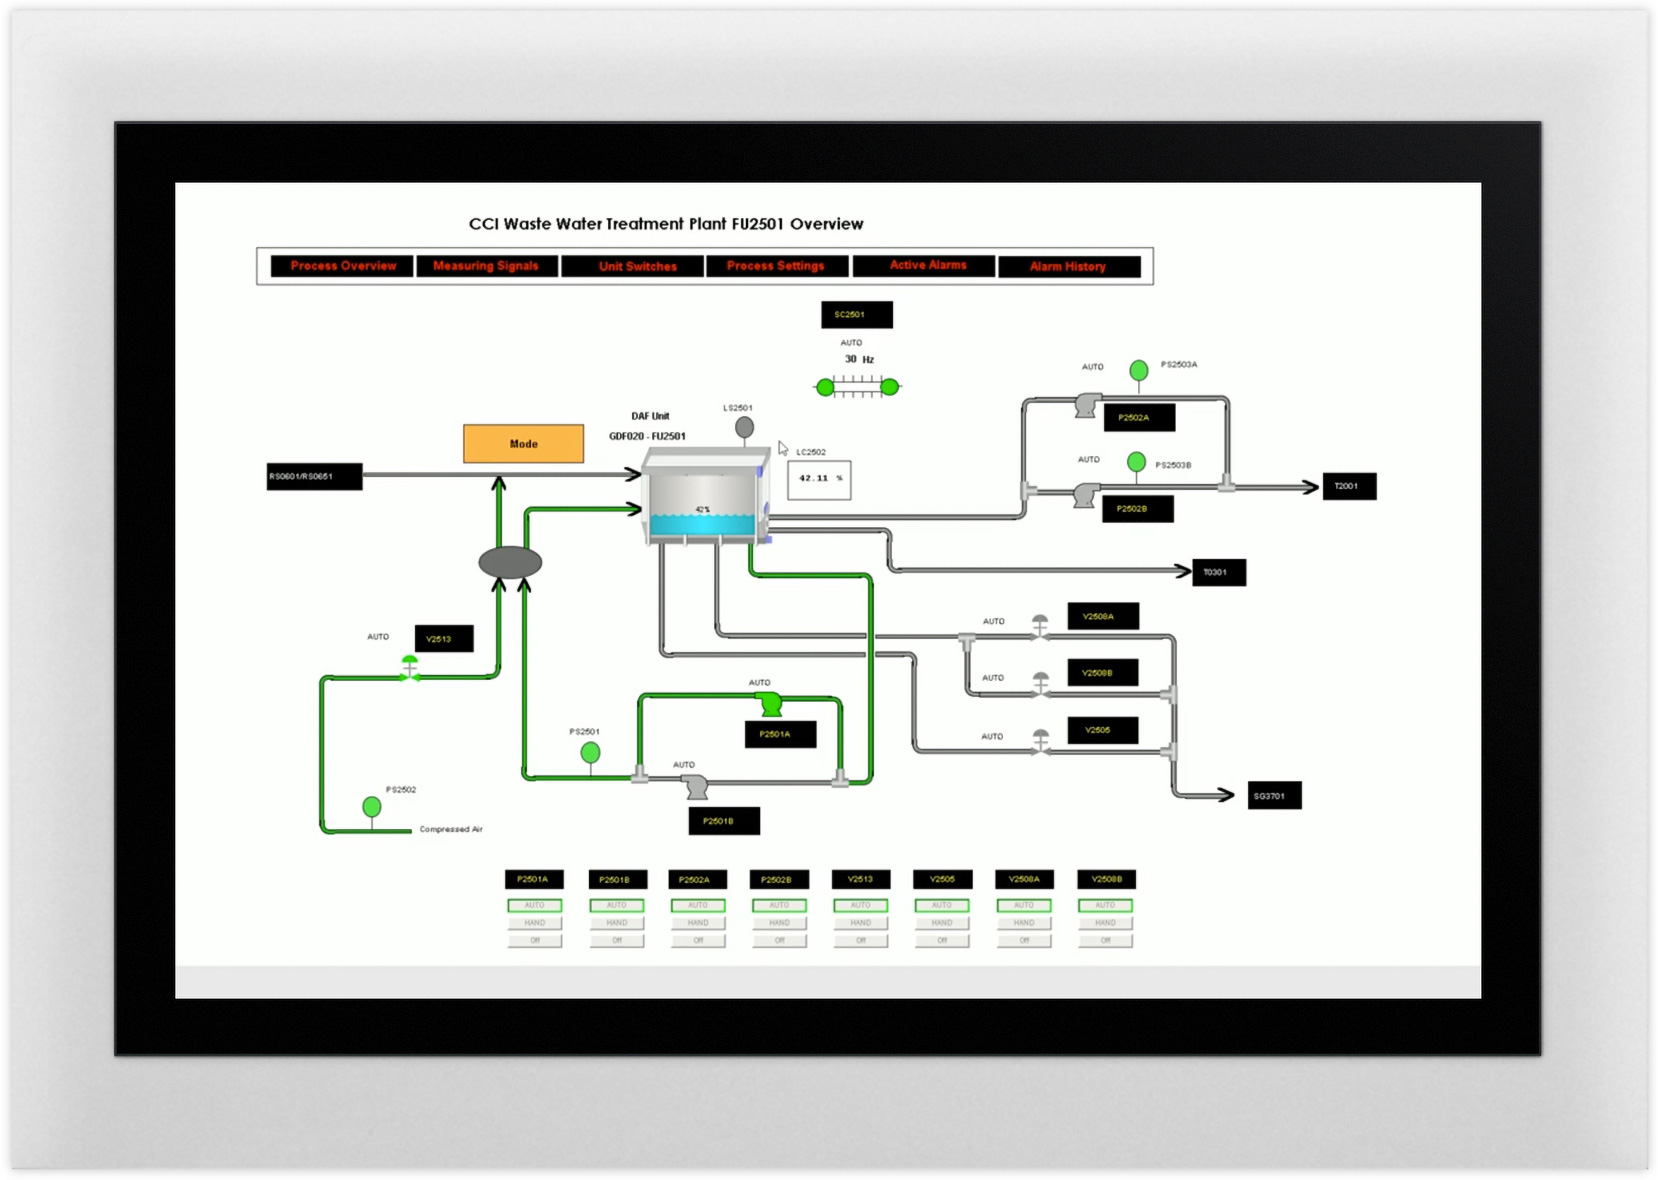 An HMI for wastewater treatment plant